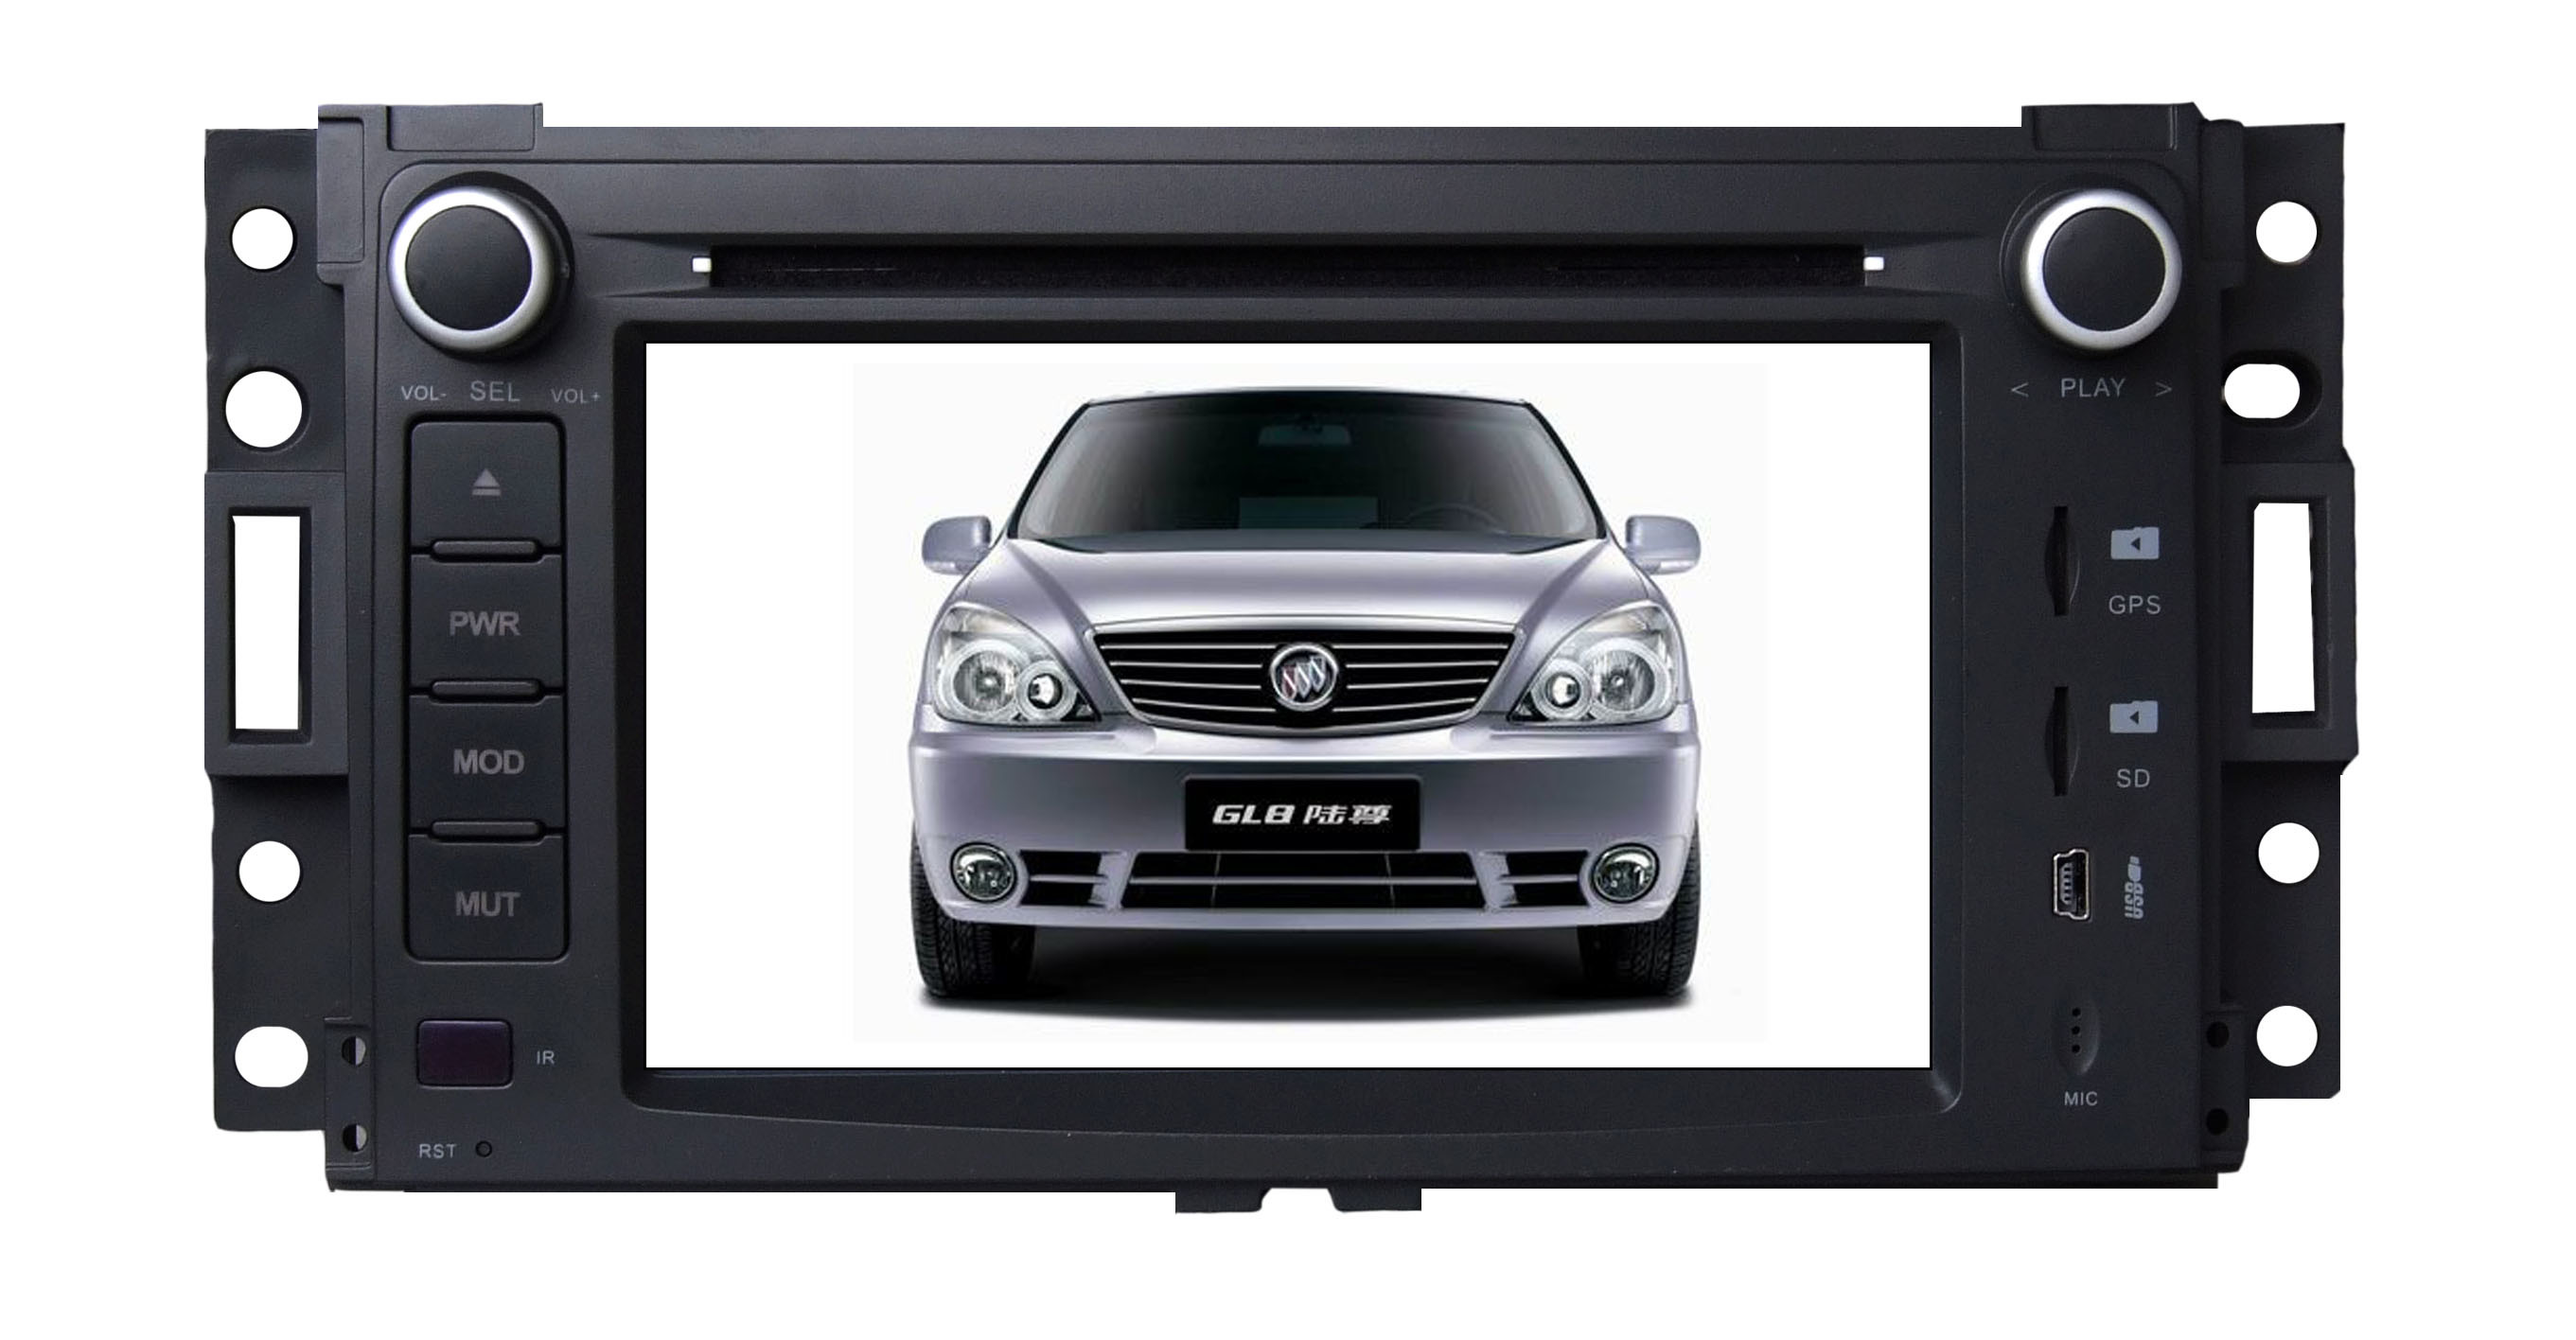 Yessun 6.2 Inch Car DVD Player for Buick Firstland